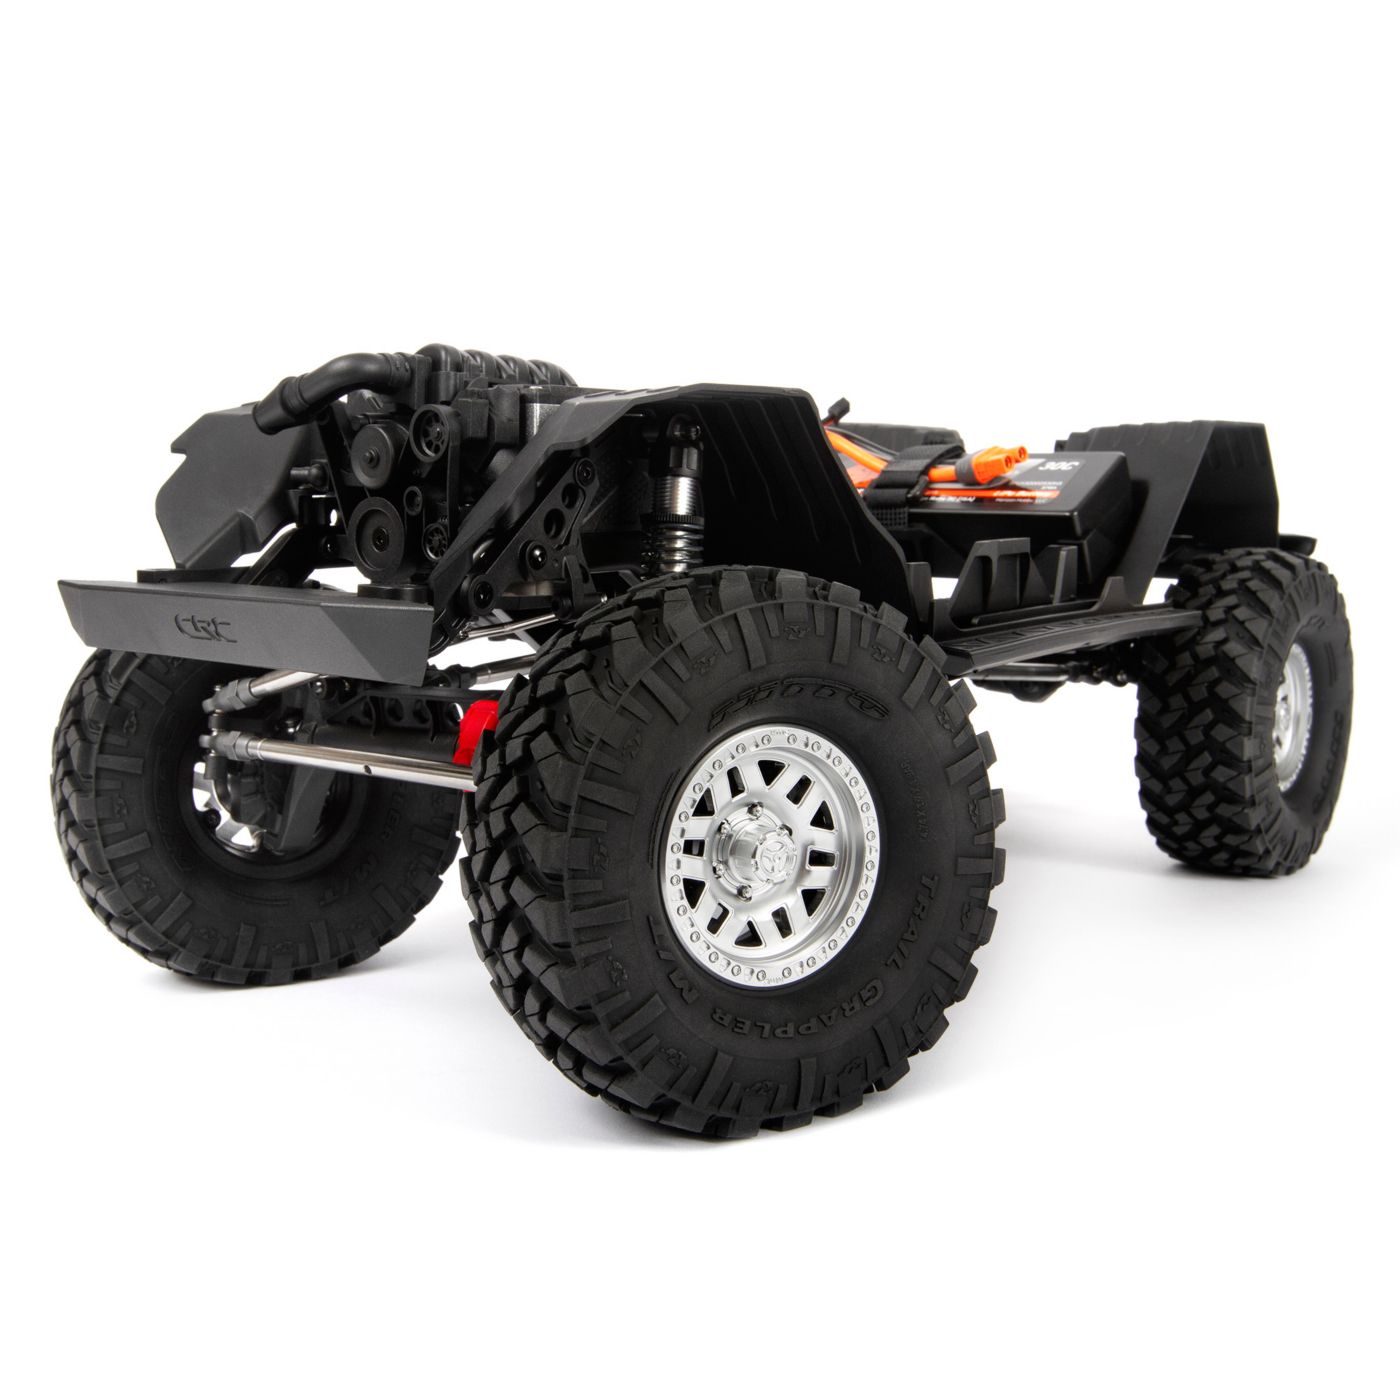 Axial 1/10 SCX10 III Jeep JL Wrangler with Portals 4WD Kit